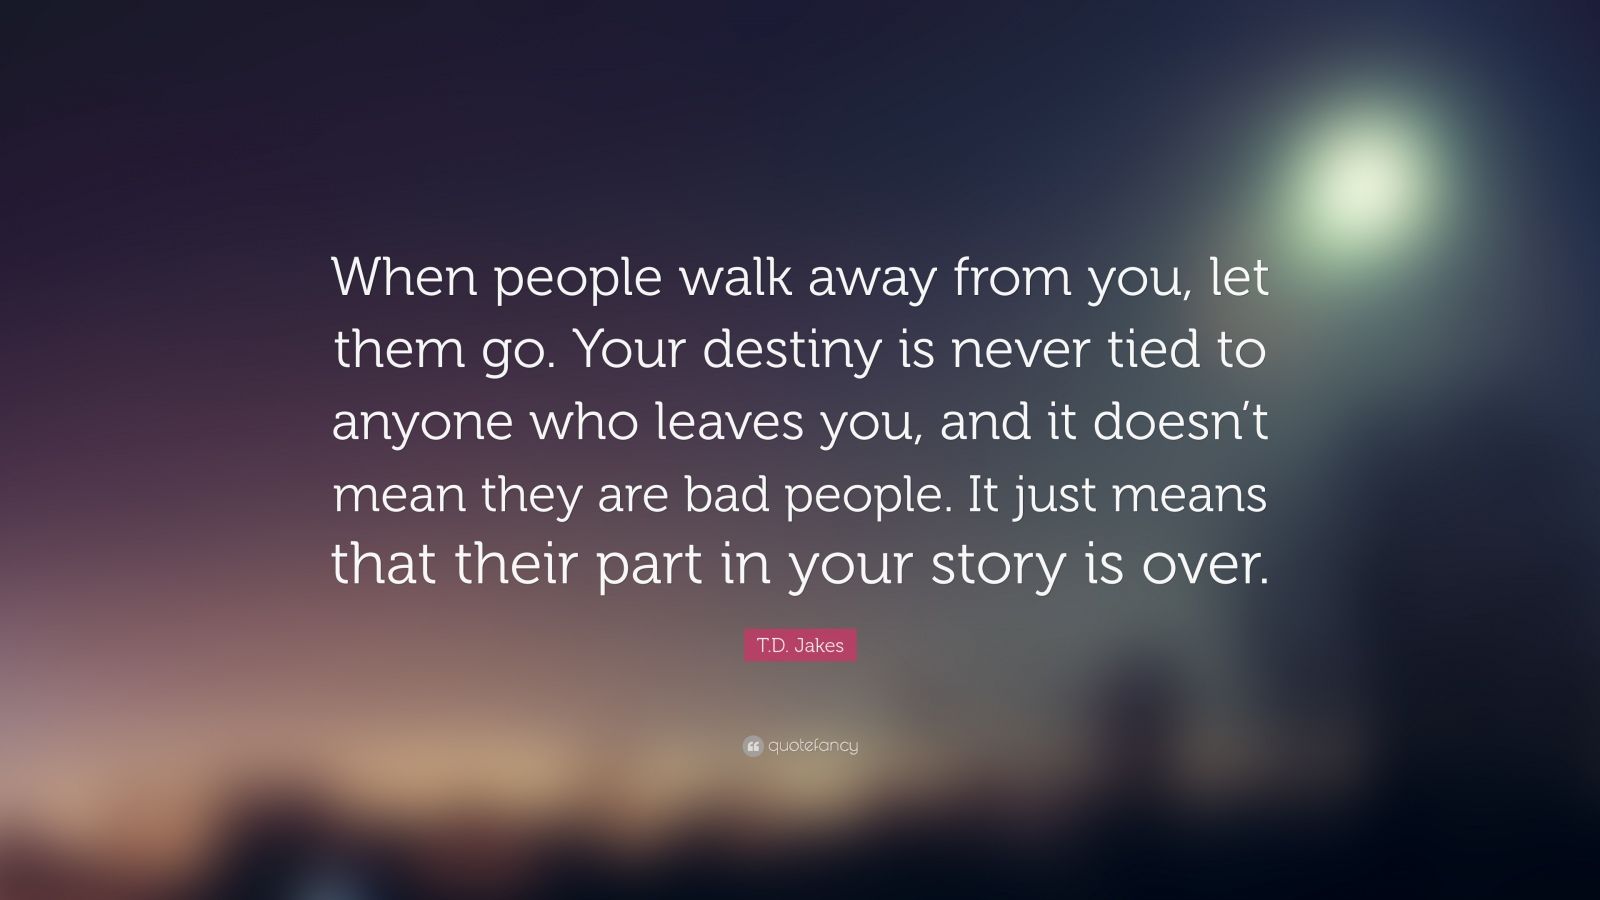 T.D. Jakes Quote: “When people walk away from you, let them go. Your